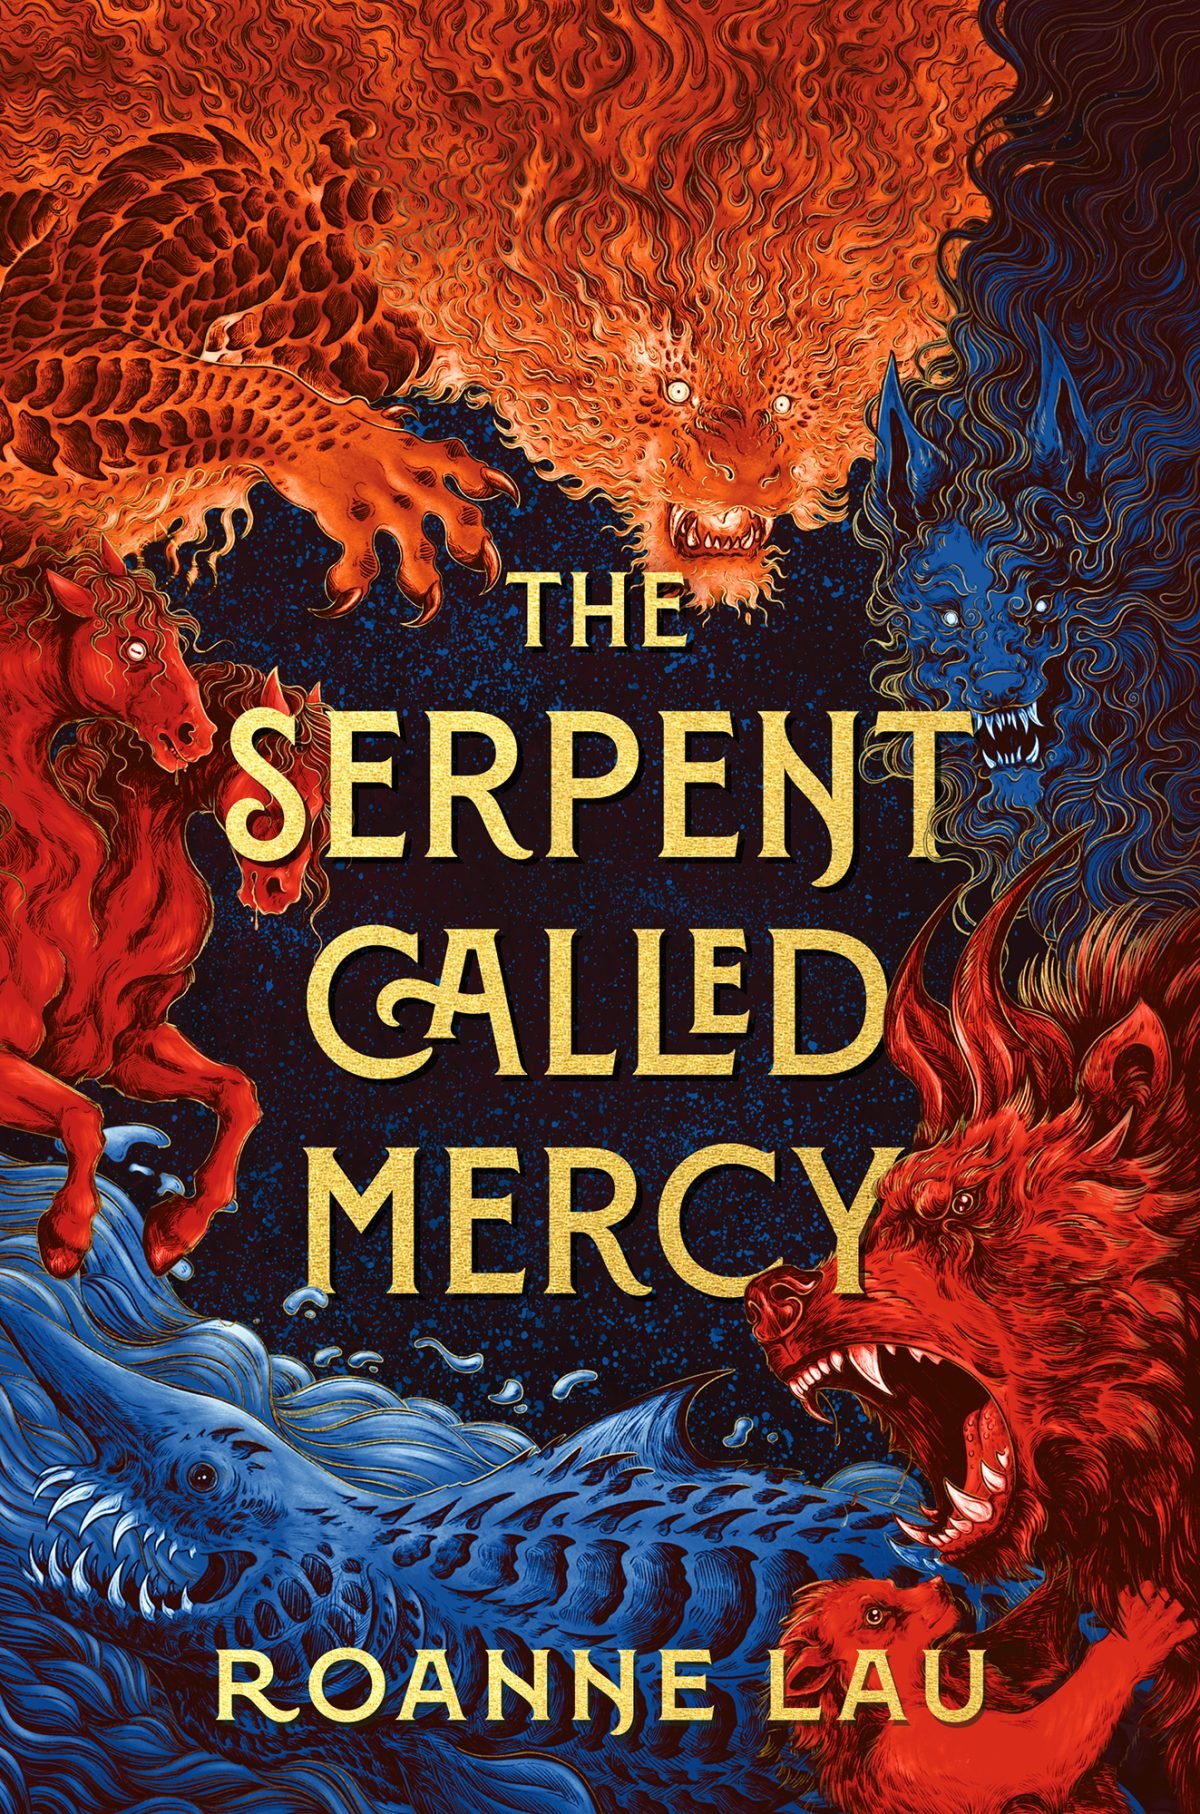 The Serpent Called Mercy by Roanne Lau exclusive cover reveal